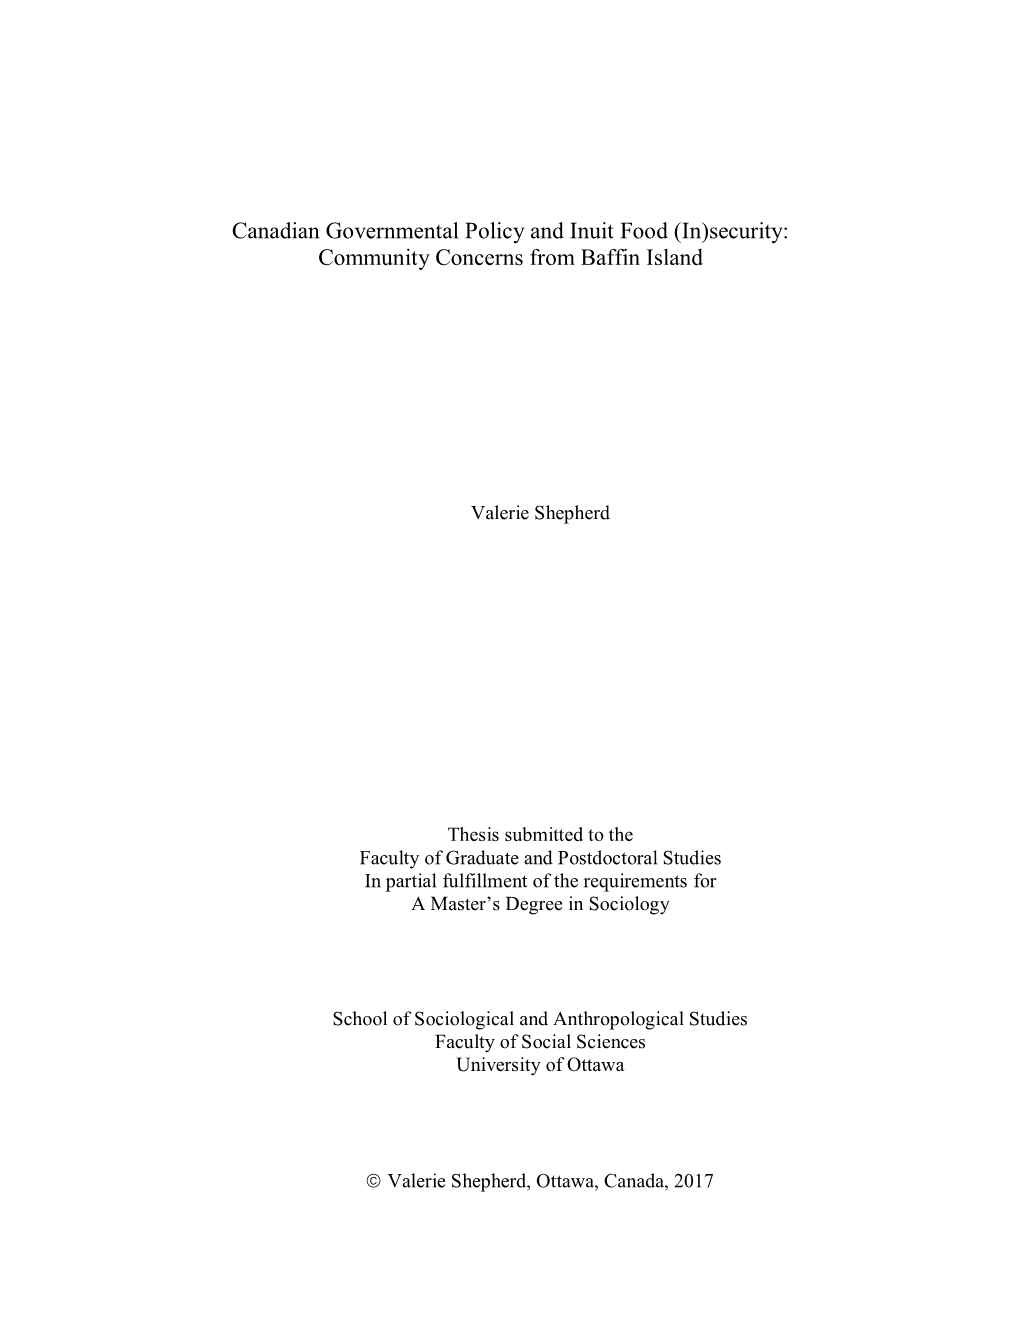 Canadian Governmental Policy and Inuit Food (In)Security: Community Concerns from Baffin Island